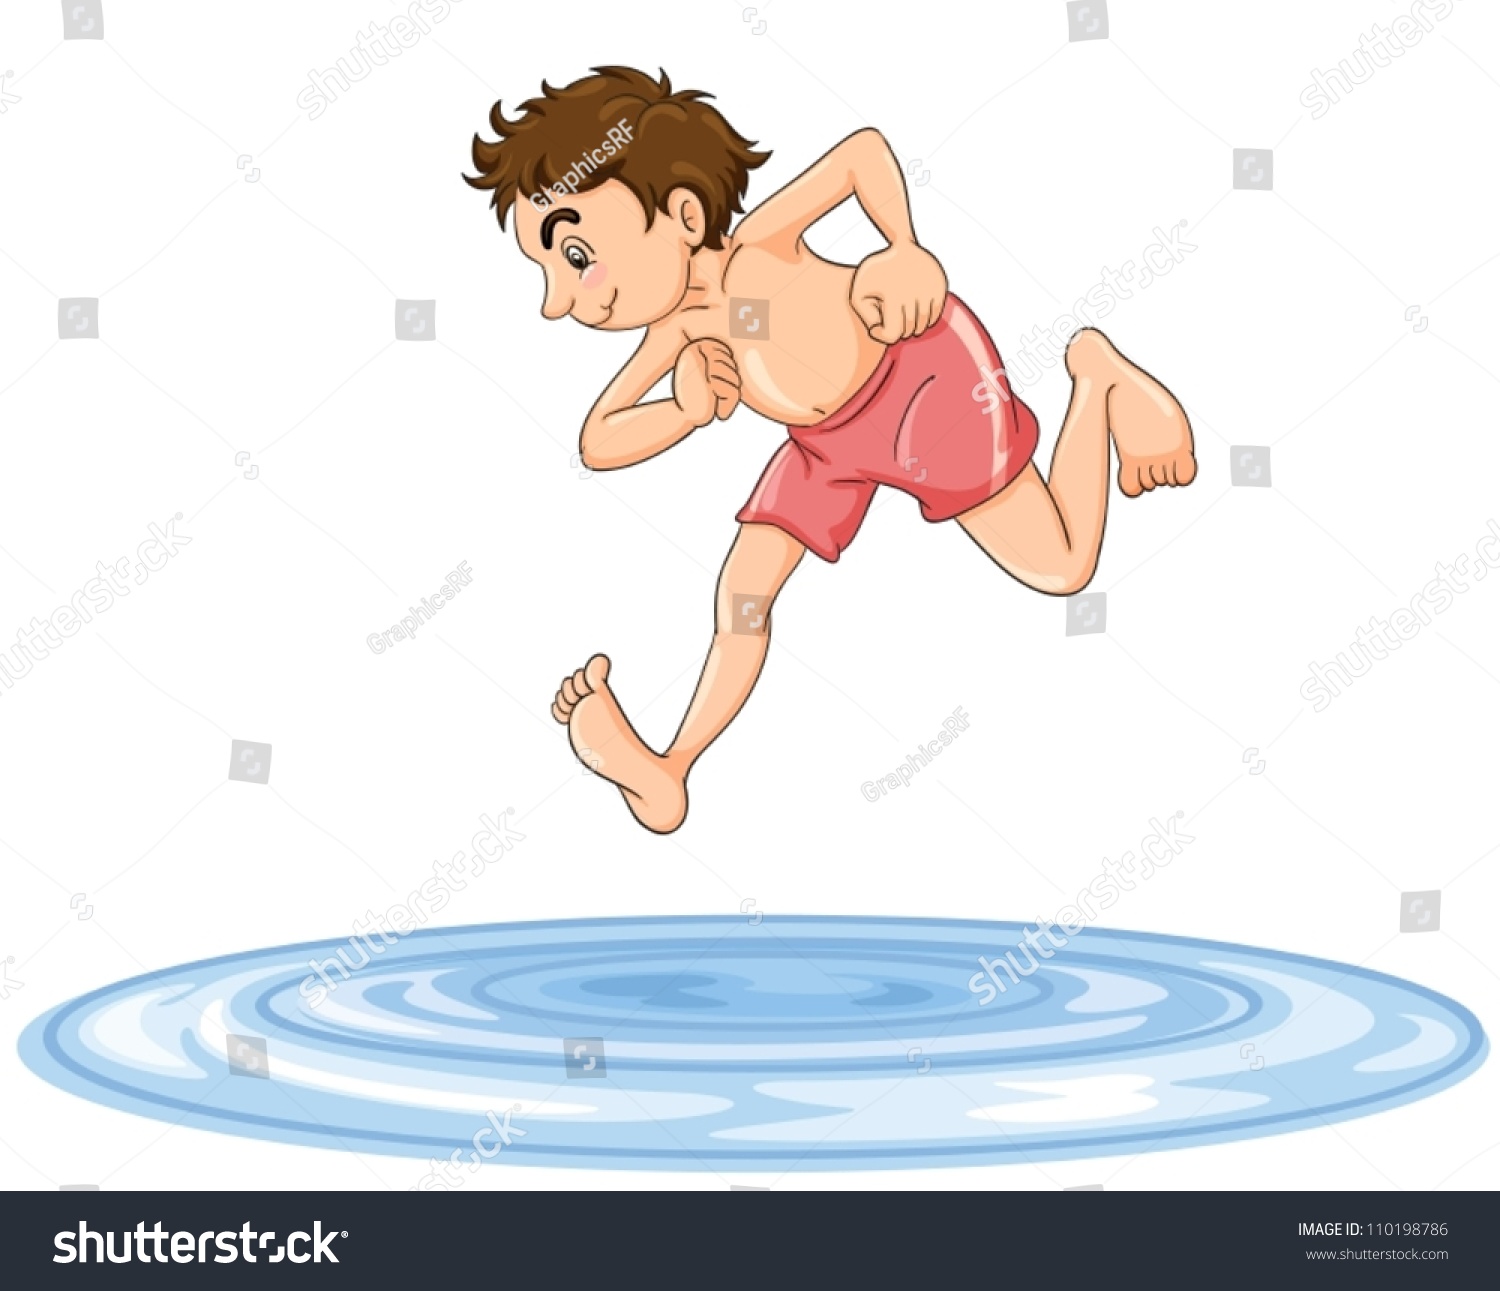 Illustration Boy Diving Into Water On Stock Vector 110198786 - Shutterstock